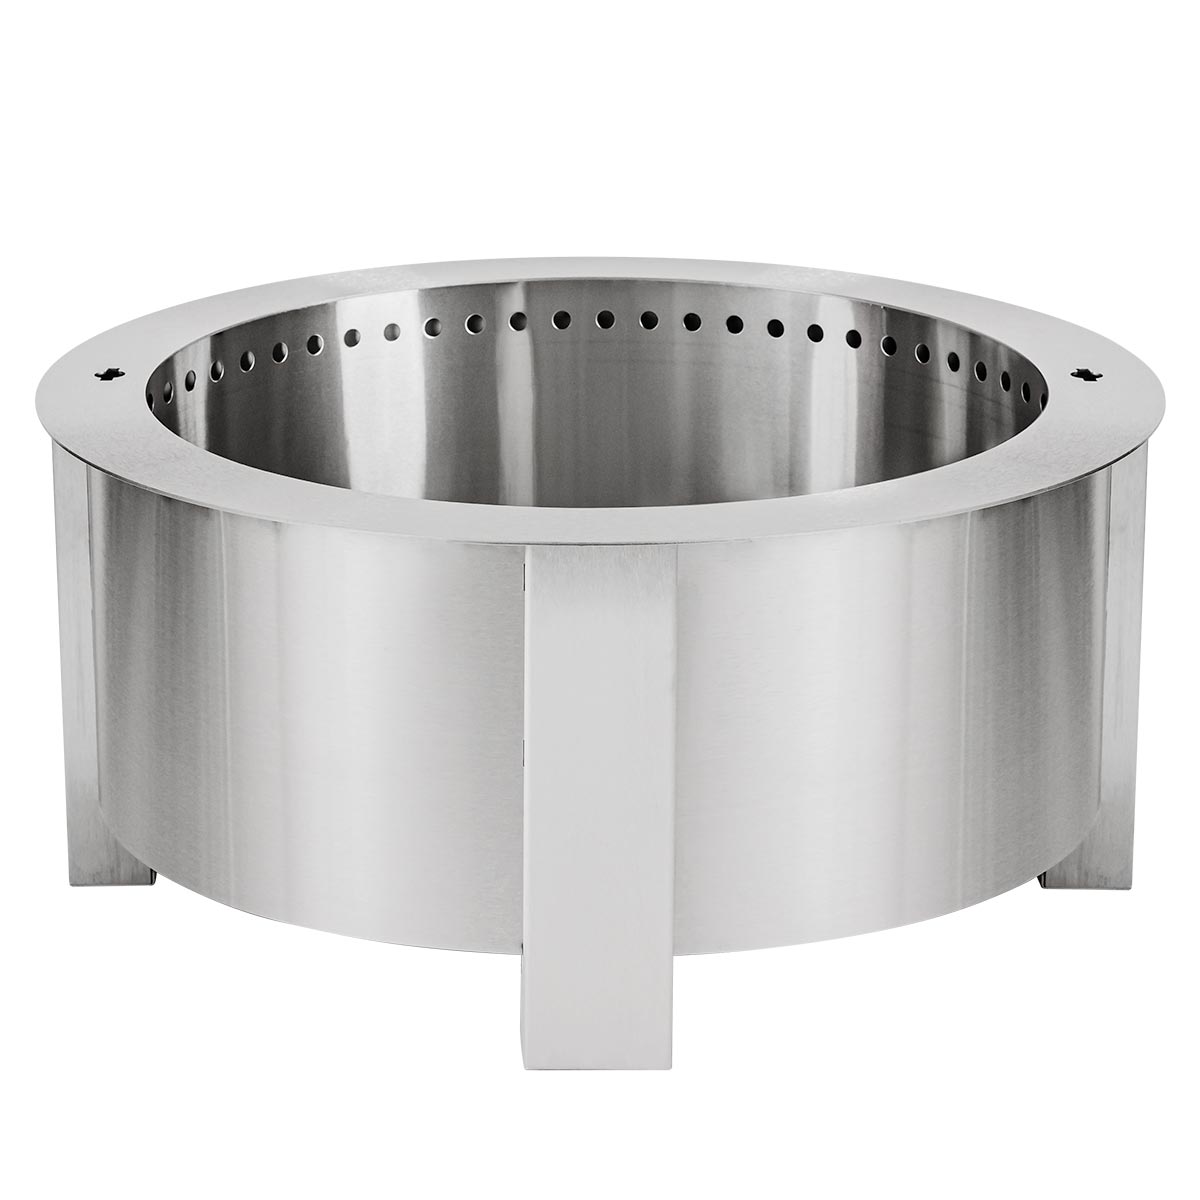 BREEO X Series 30 Smokeless Fire Pit (Stainless)